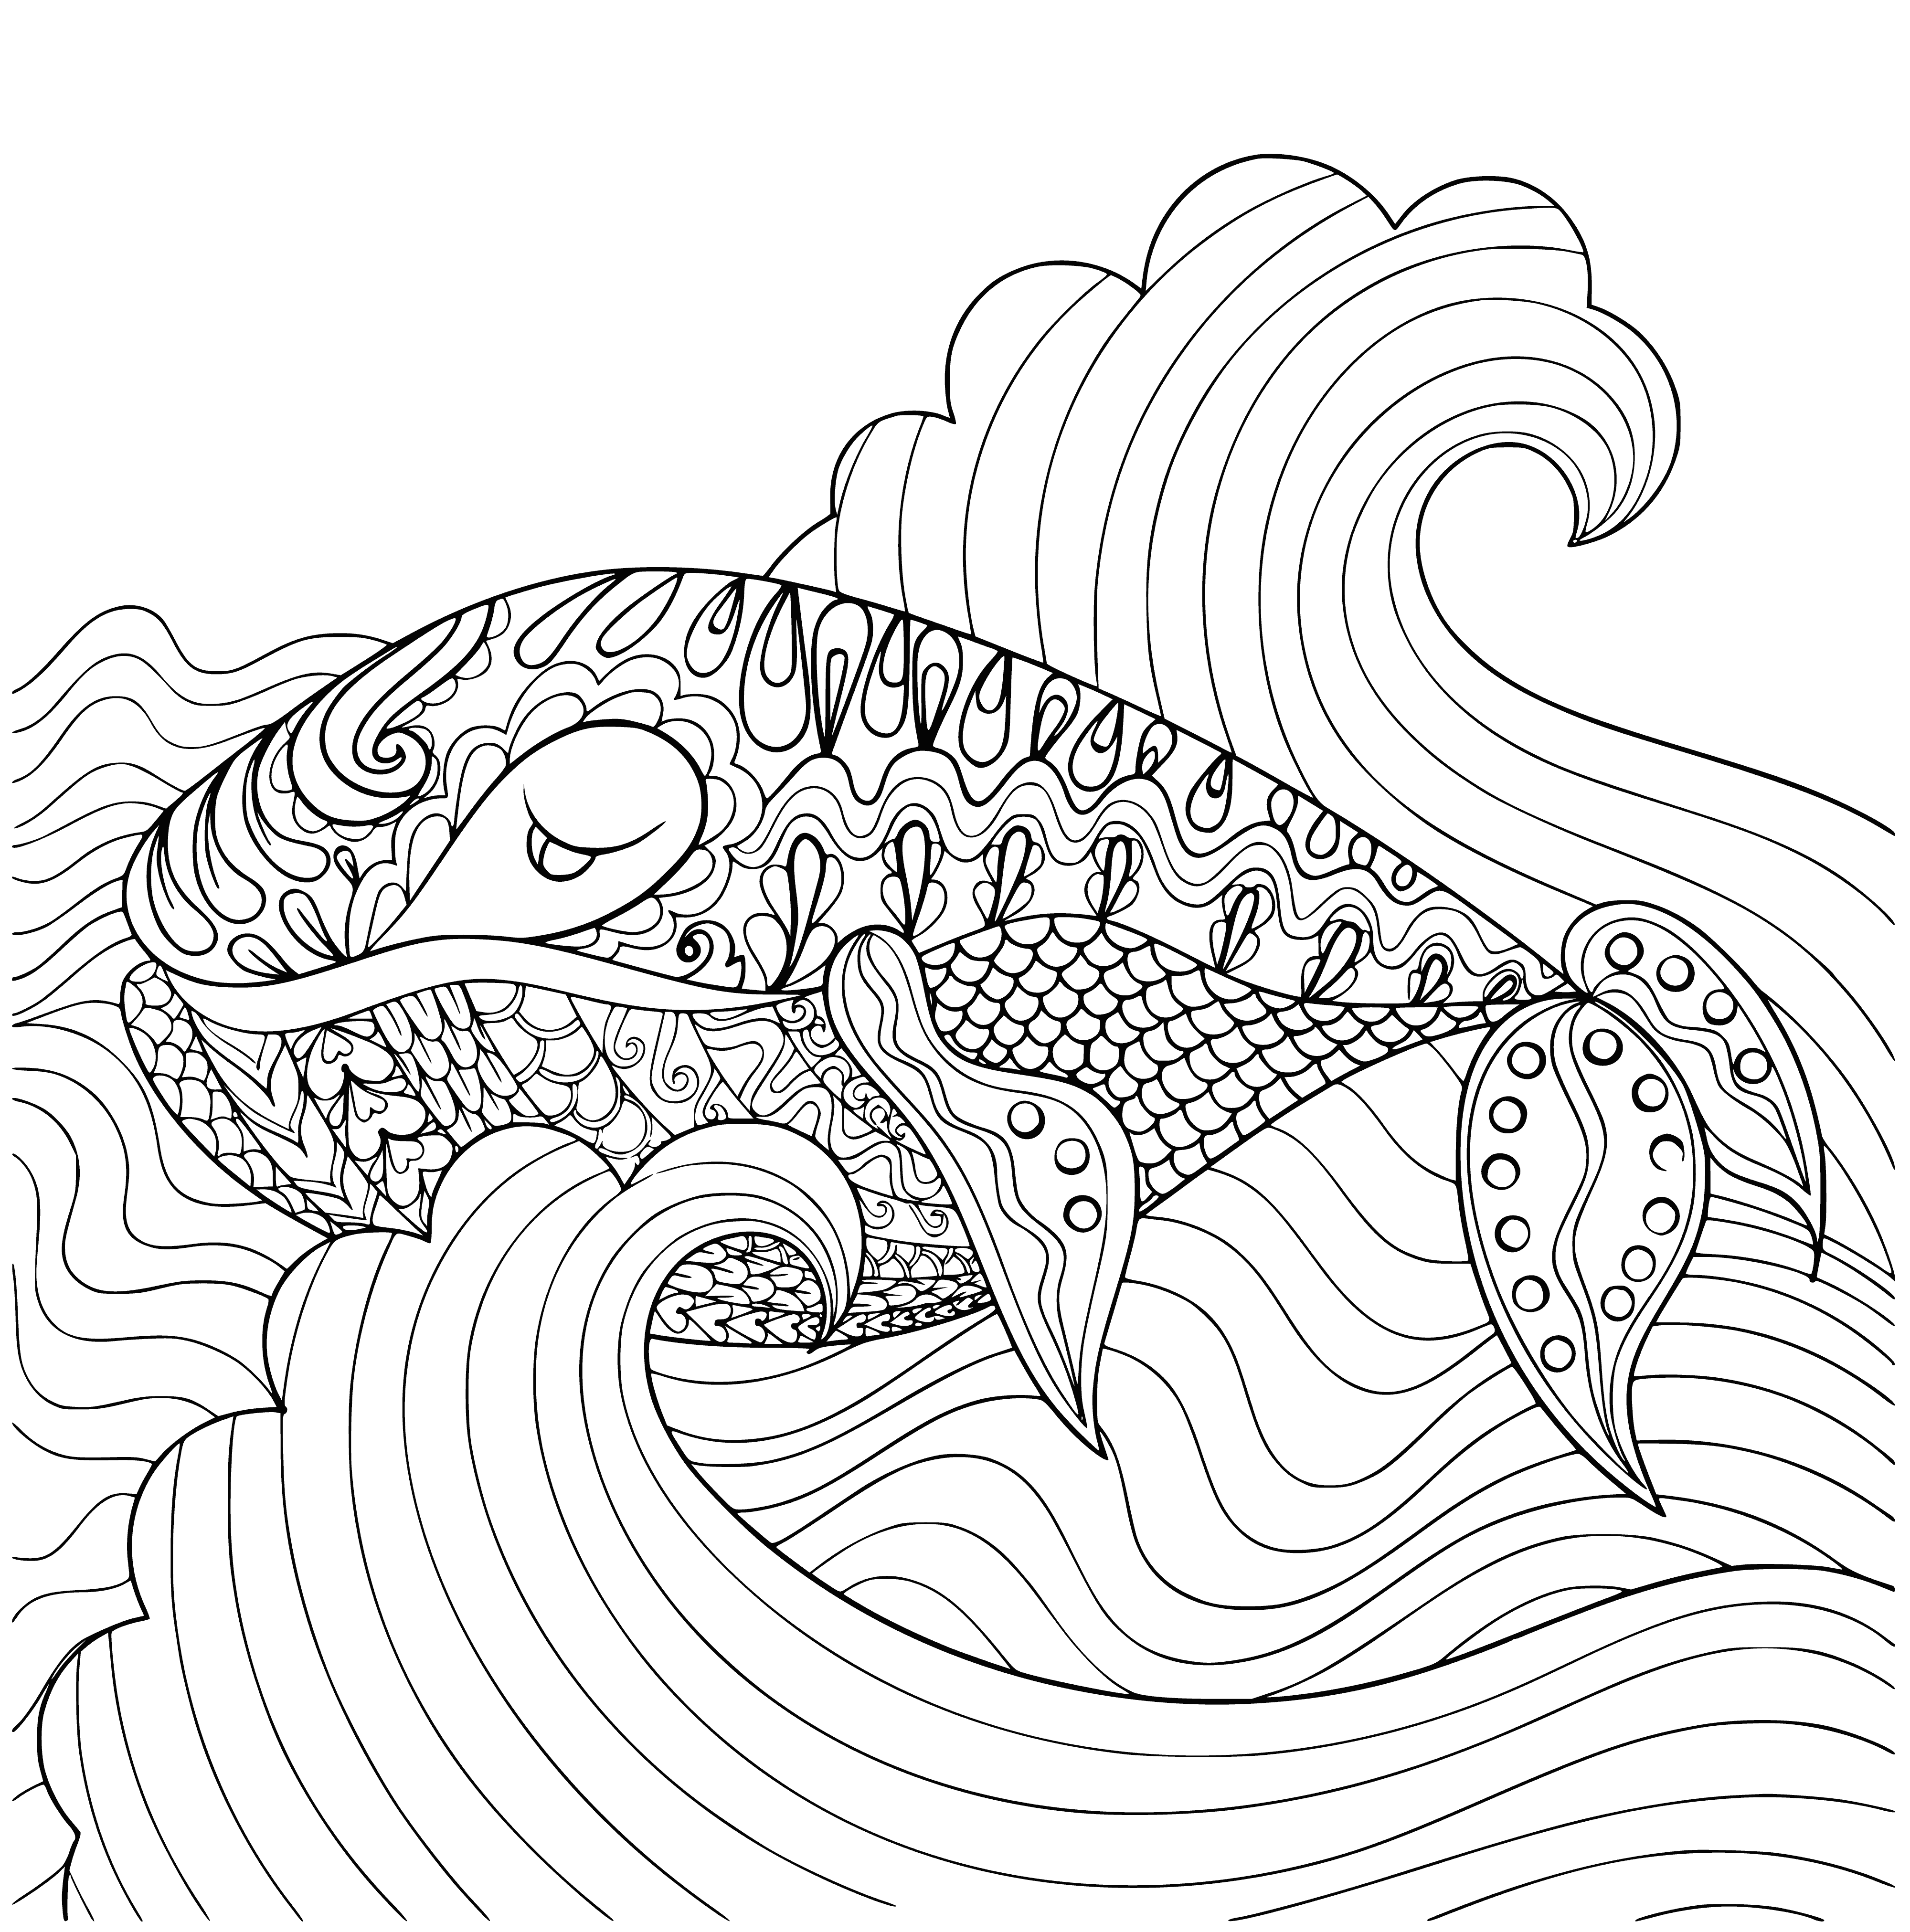 coloring page: A large whale peacefully swims through twinkling water, surrounded by curious fish.